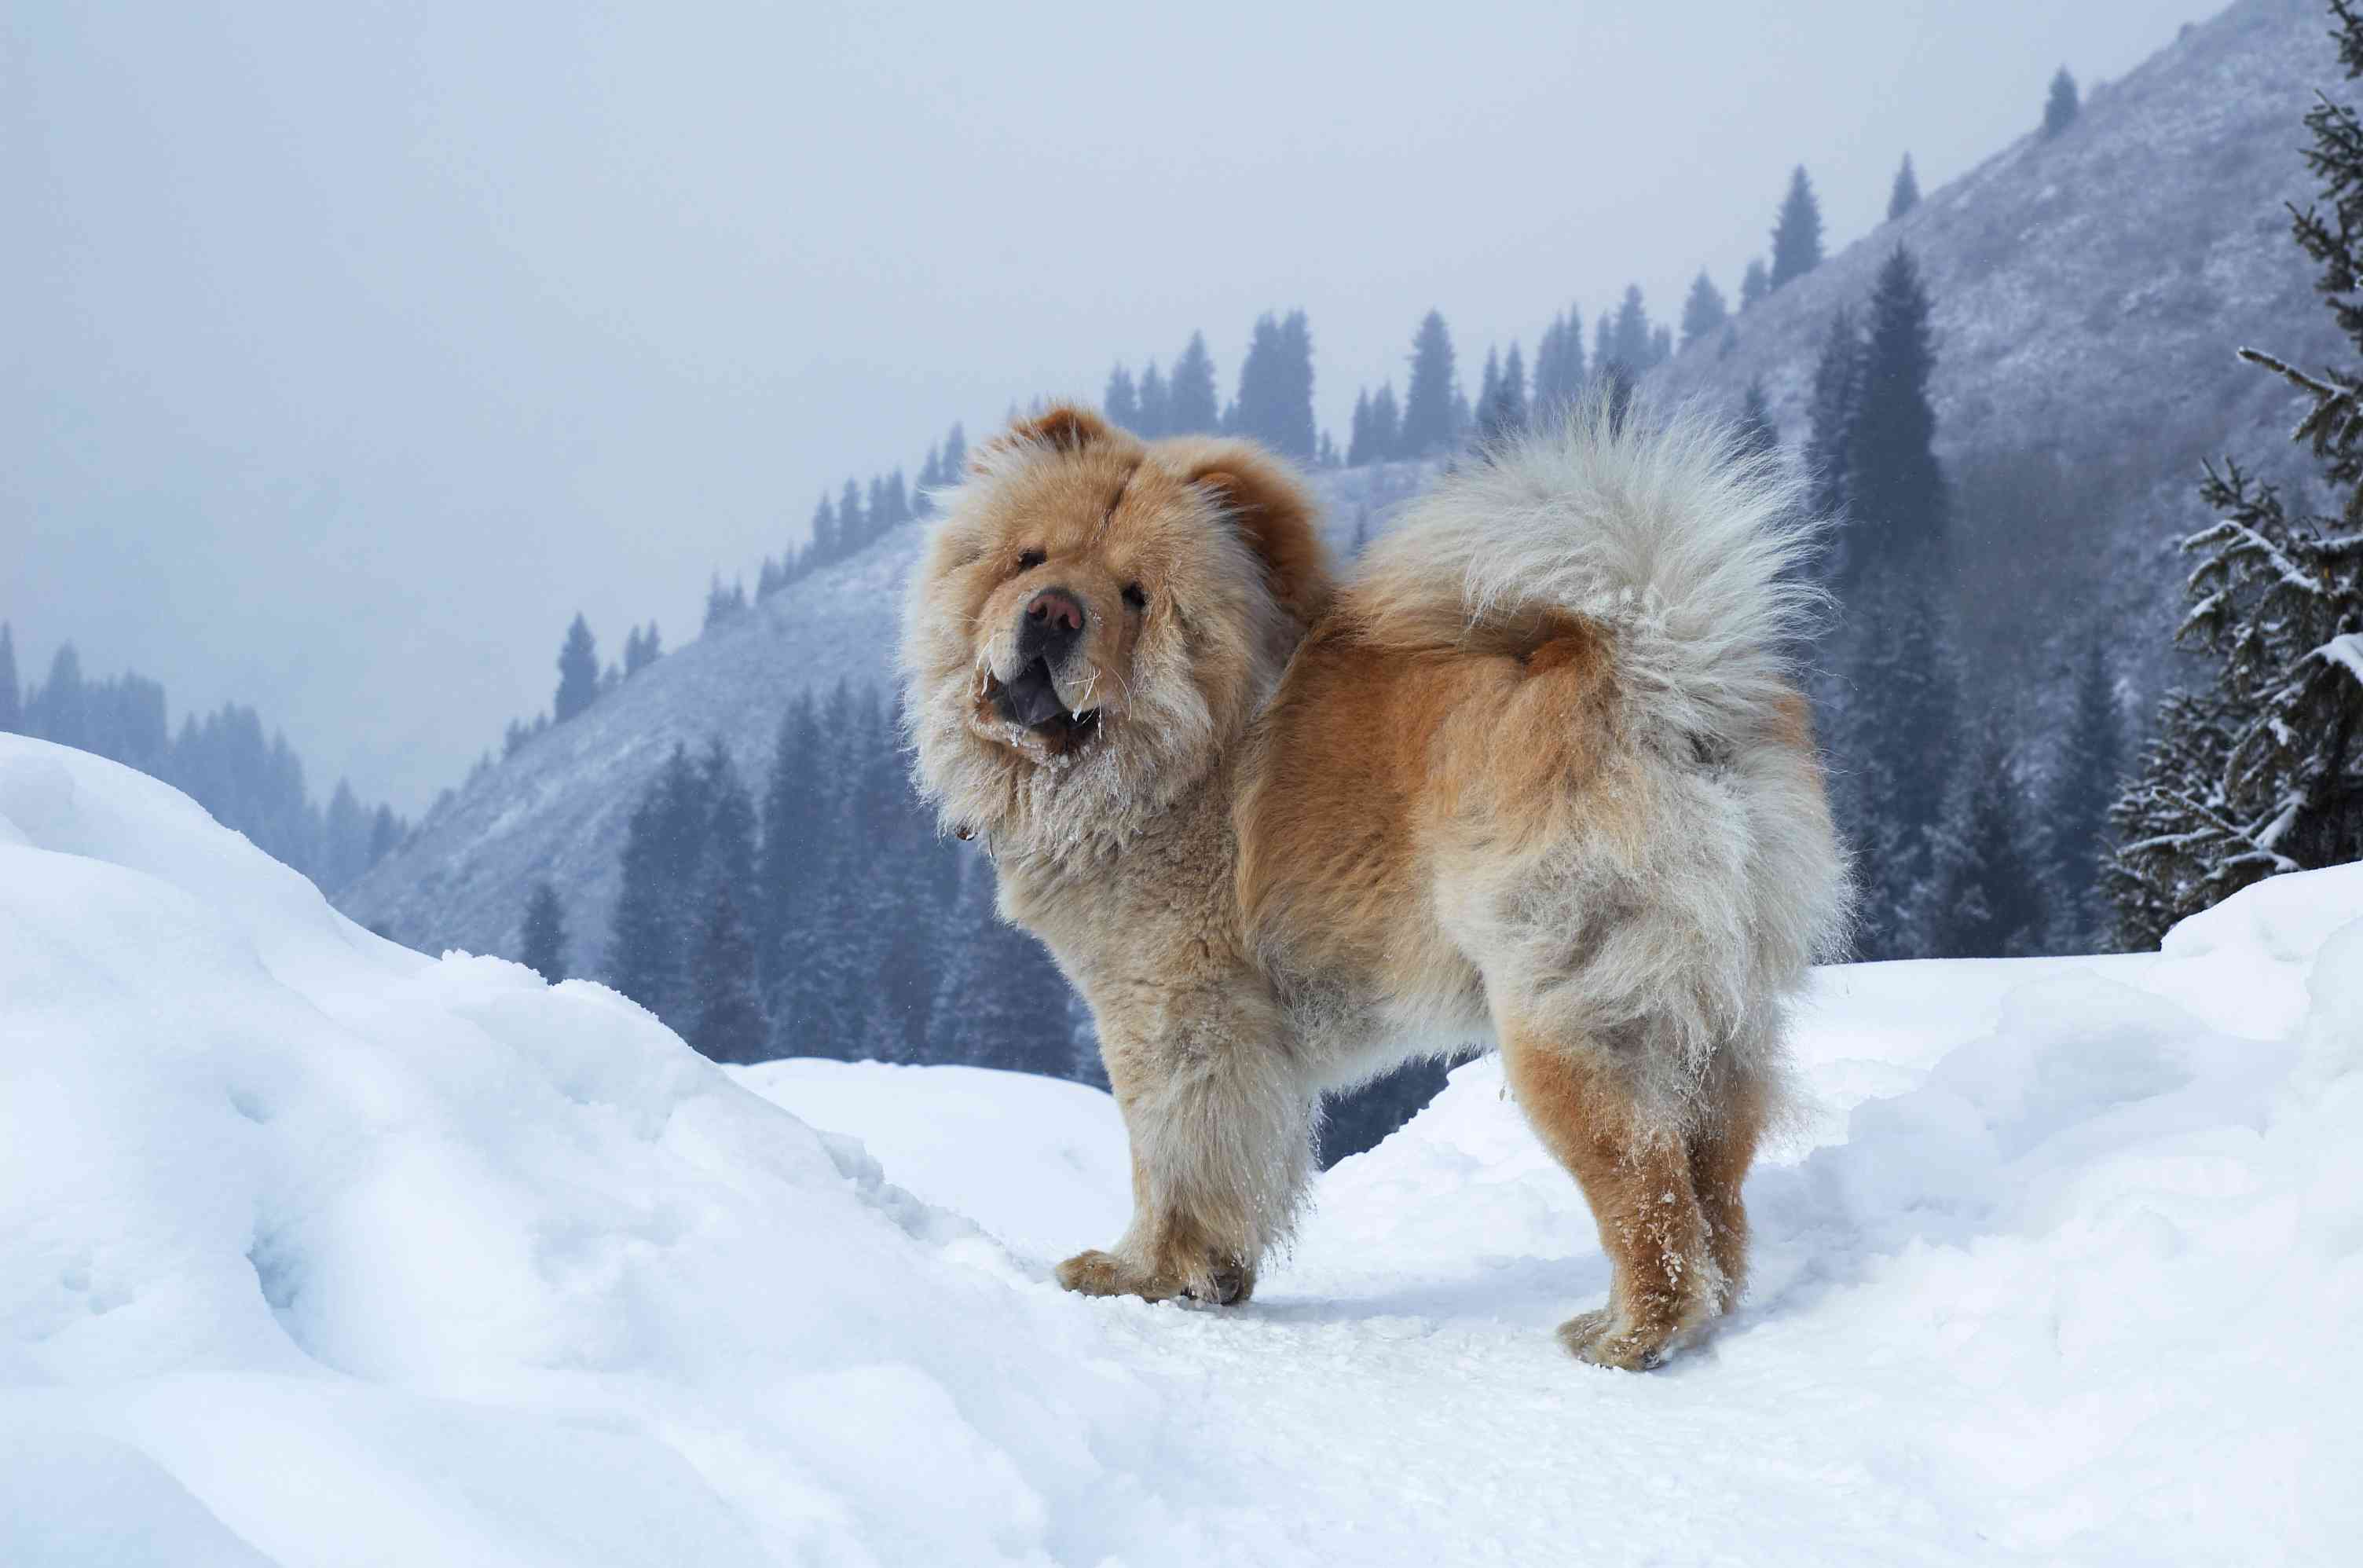 Chow Chow standing in the snow with mountains in the background